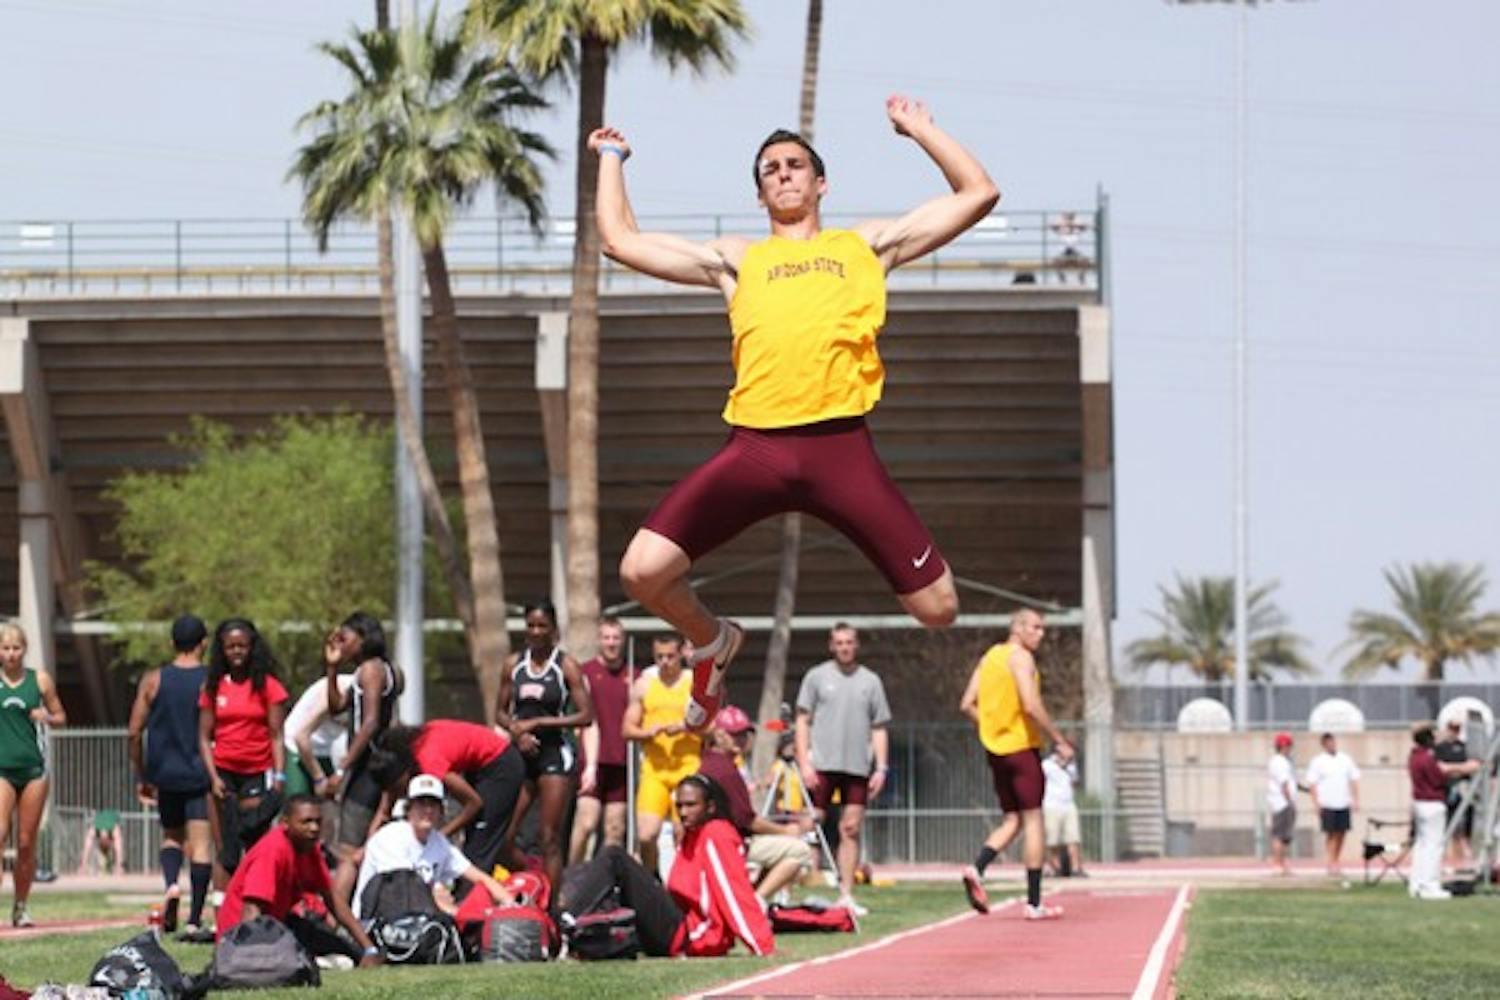 Back Under the Sun: ASU junior Jamie Sandys attempts the long jump at the Baldy Castillo Invitational on Saturday in Tempe. Both the men’s and women’s track teams split between the ASU Invitational in Tempe and the Stanford Invitational in Palo Alto, Calif., this weekend. (Photo by Beth Easterbrook)